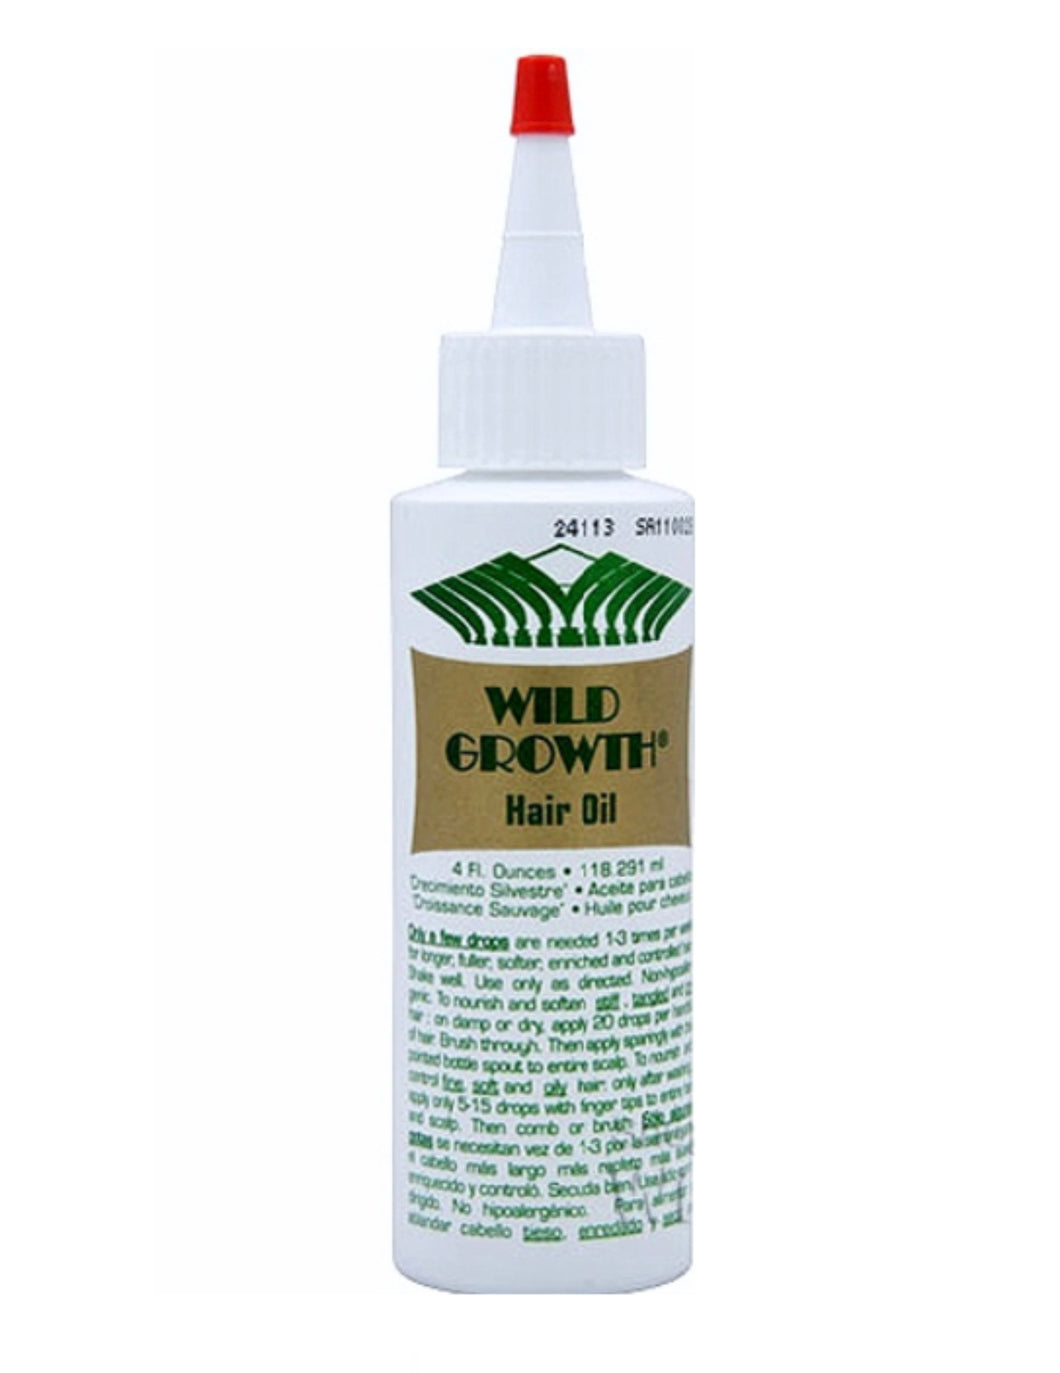 Wild Growth hair oil promotes strong thick hair growth for all hair types.